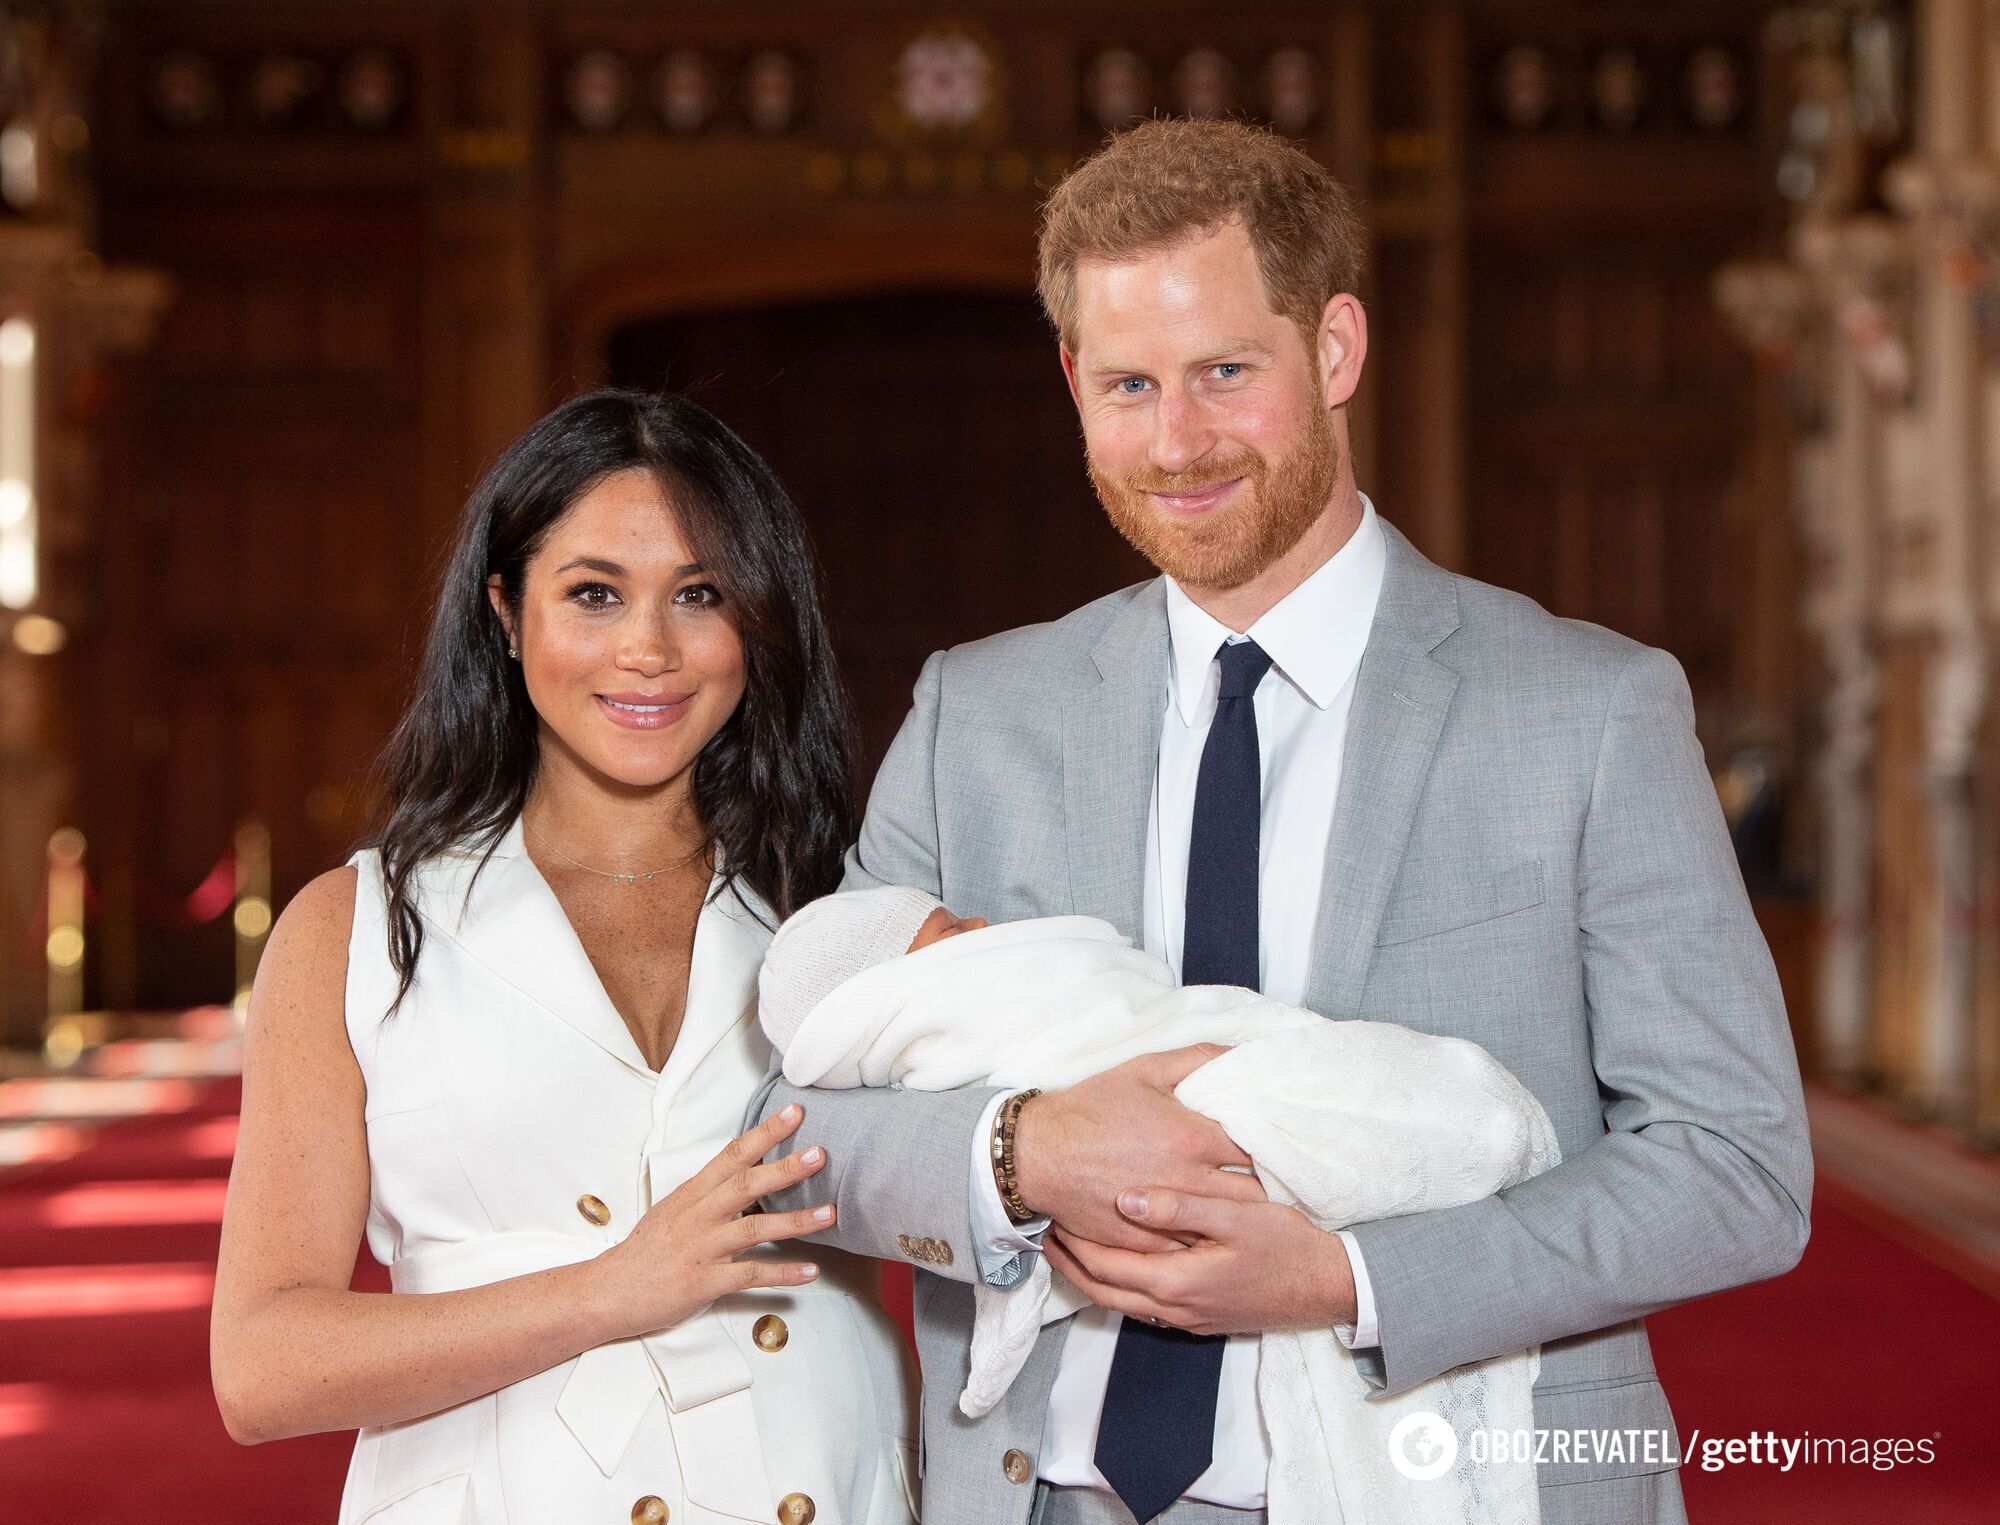 Prince Harry and Meghan Markle changed their children's surname: they used to be Mountbatten-Windsor